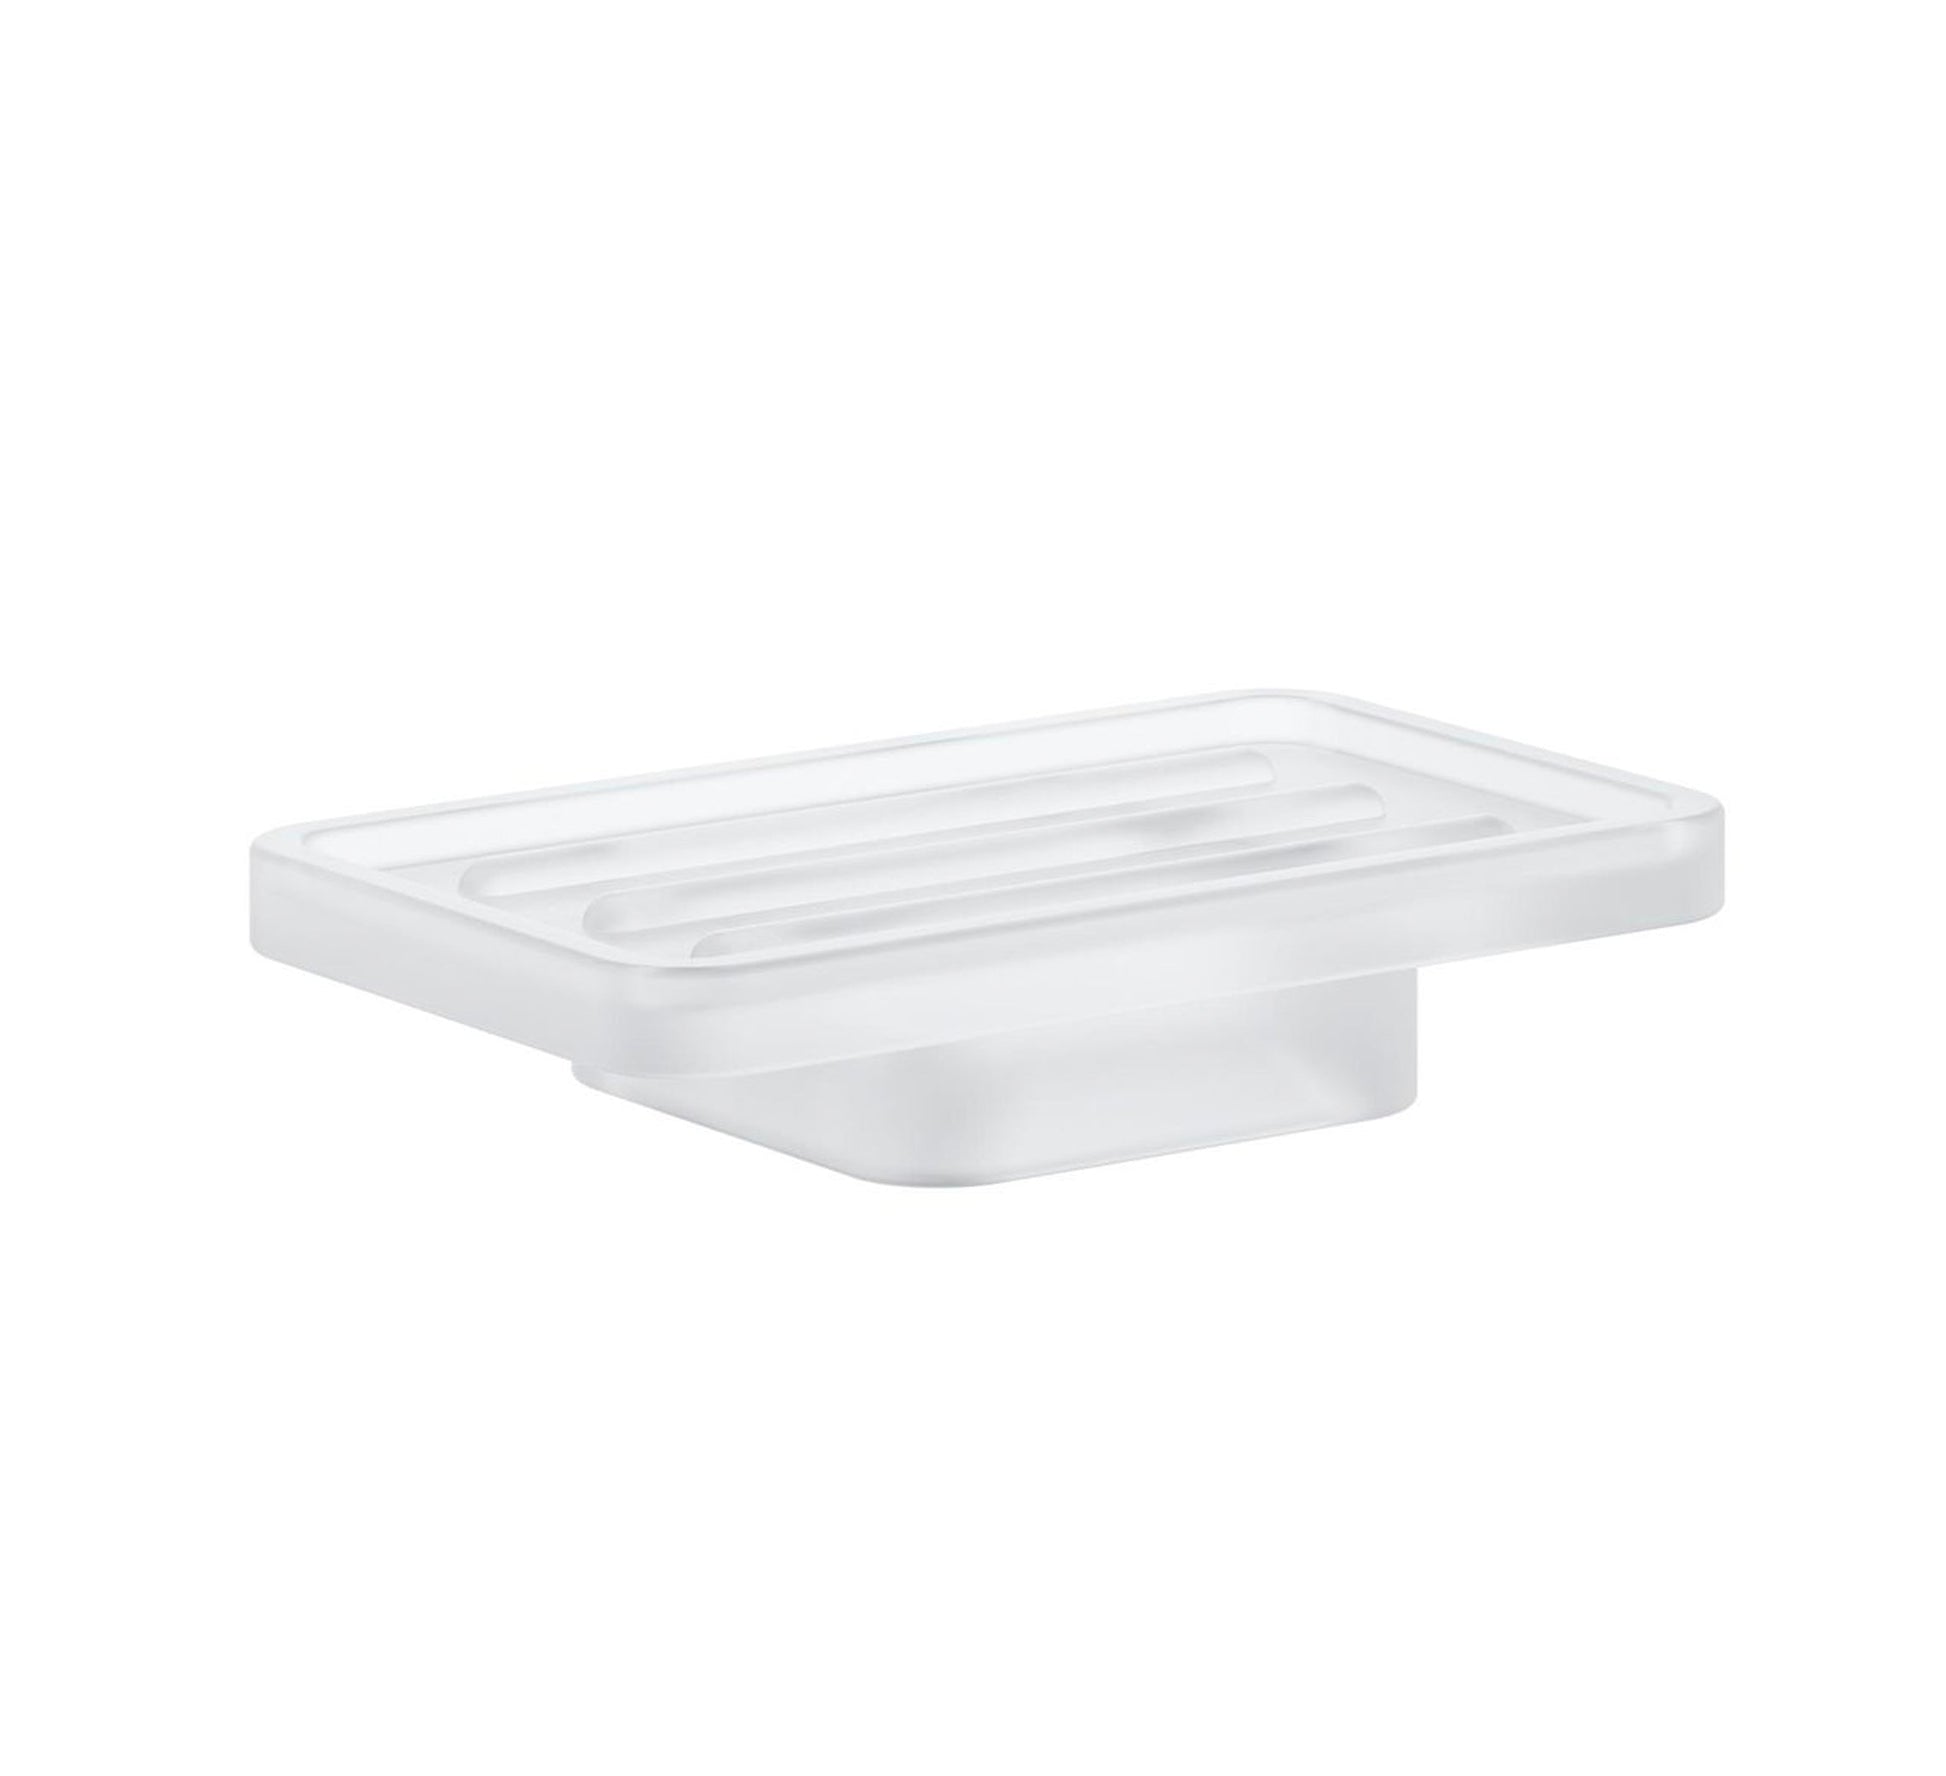 GROHE SELECTION CUBE SOAP DISH - 40806000